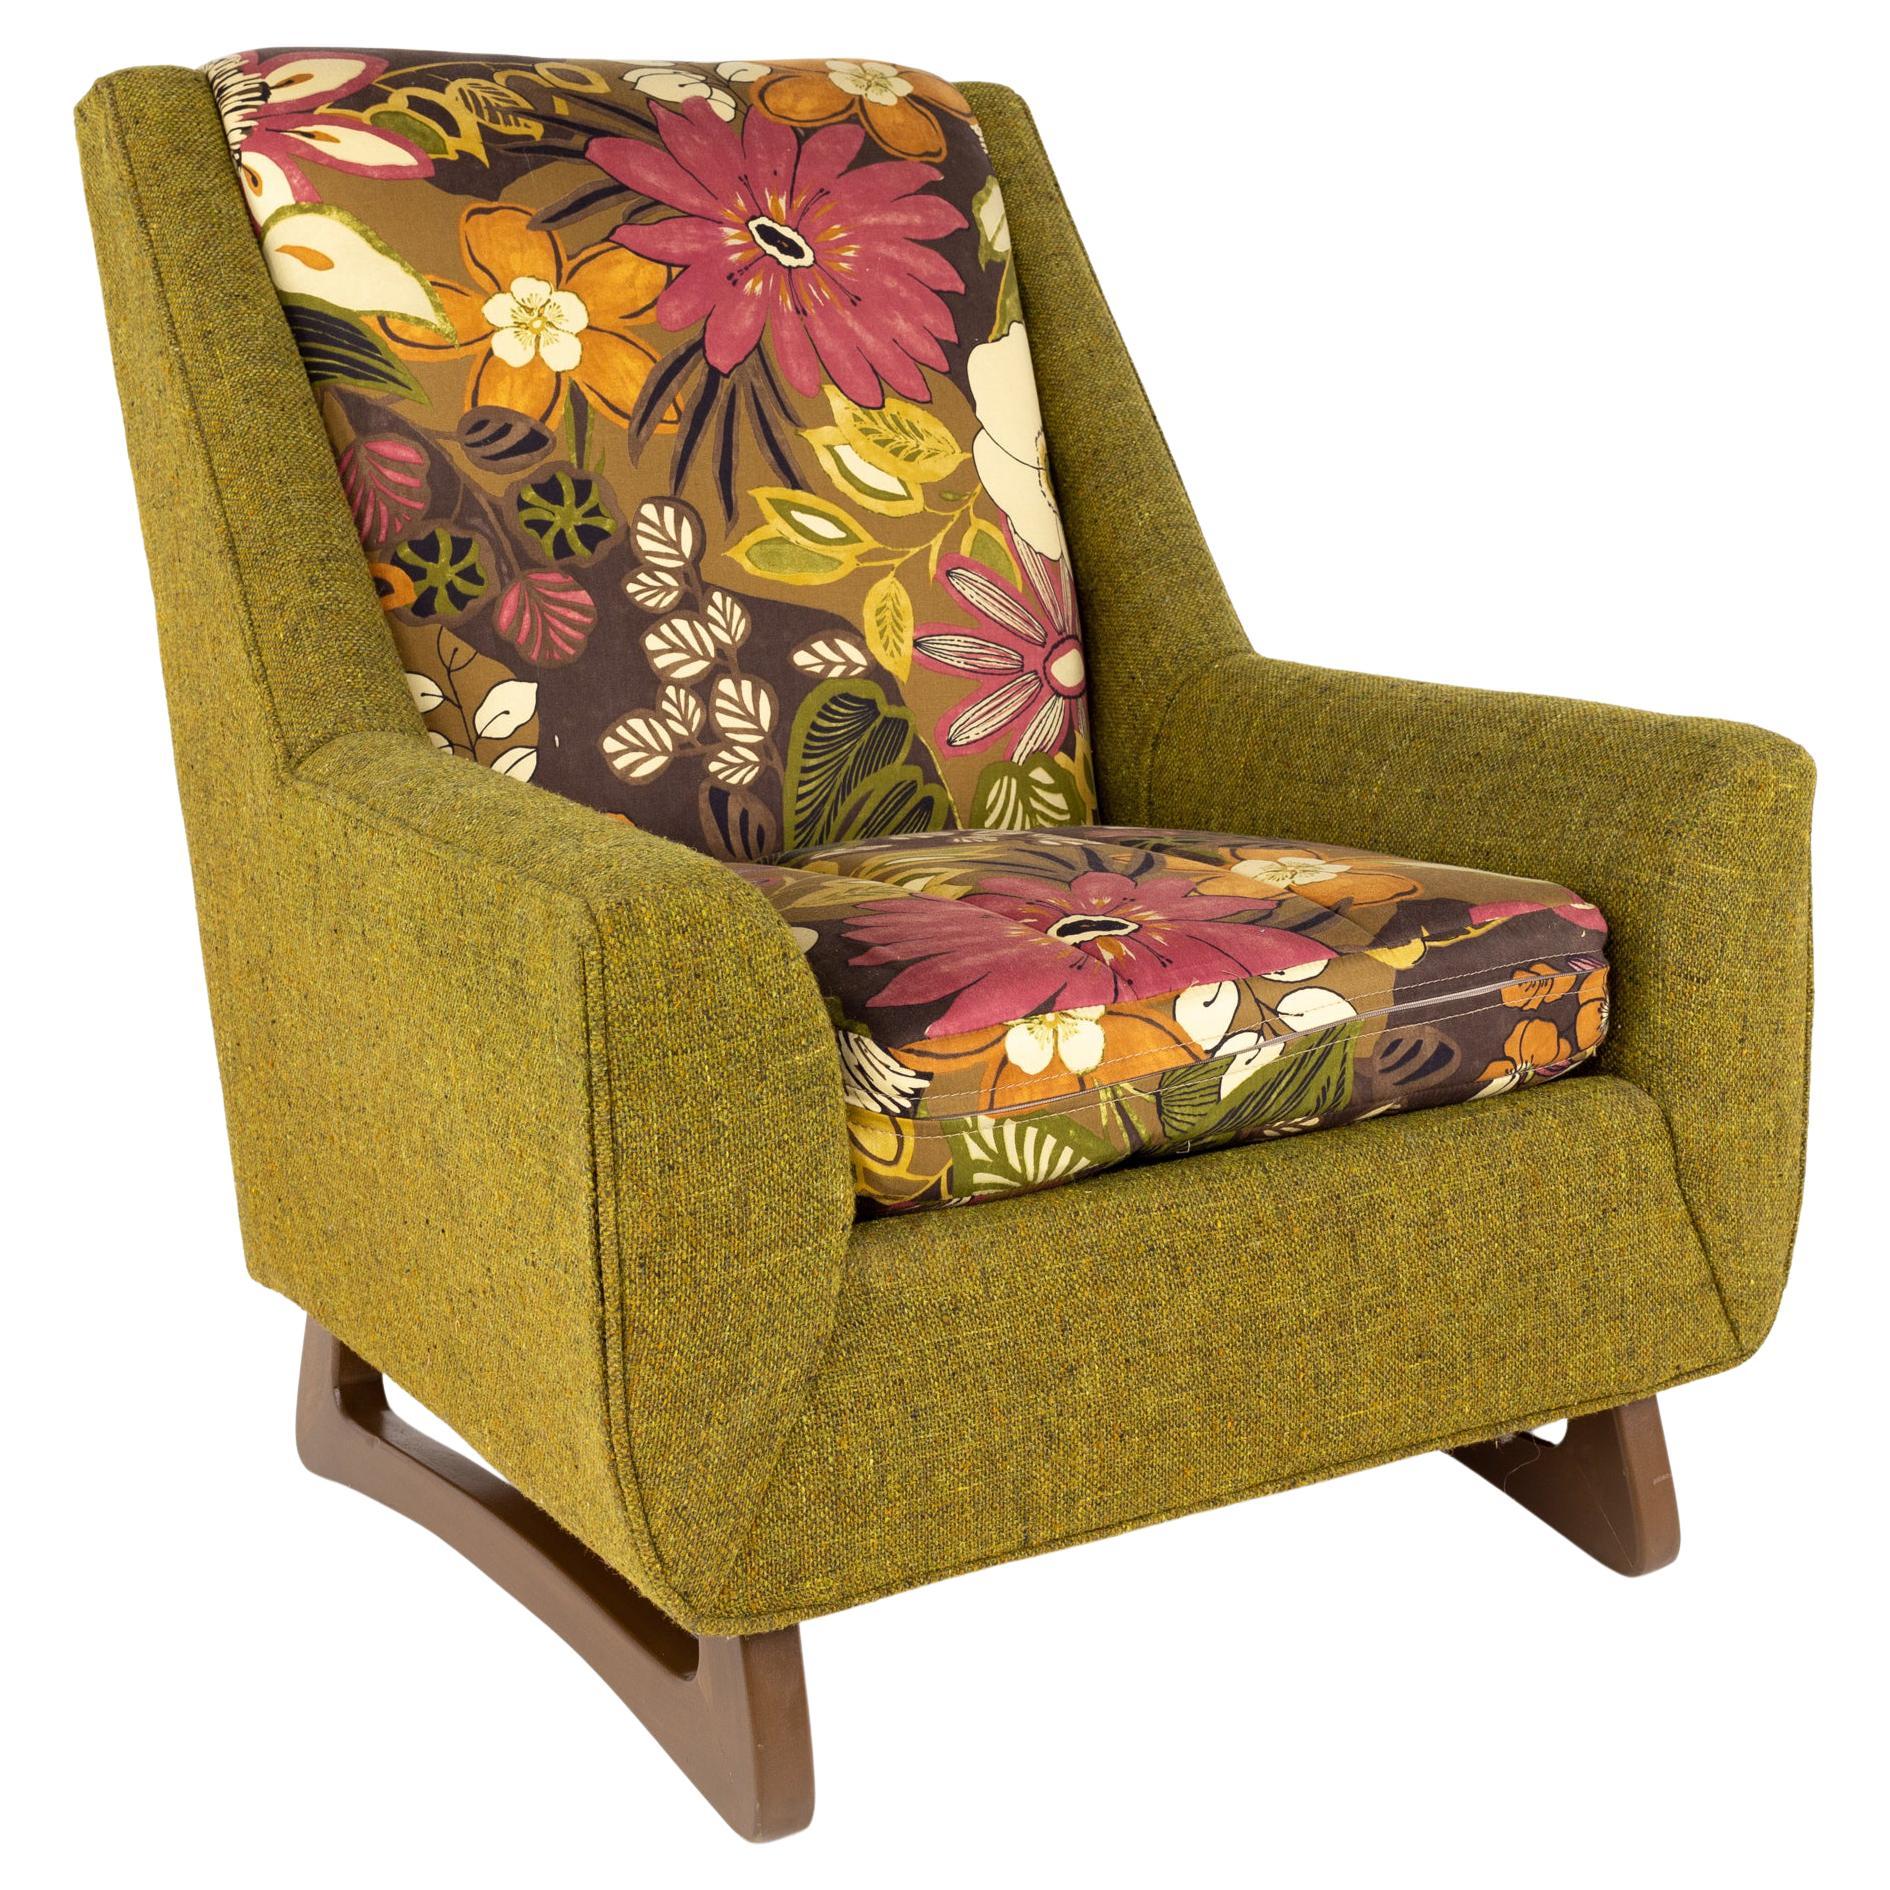 Kroehler Adrian Pearsall Style Contemporary Armchair